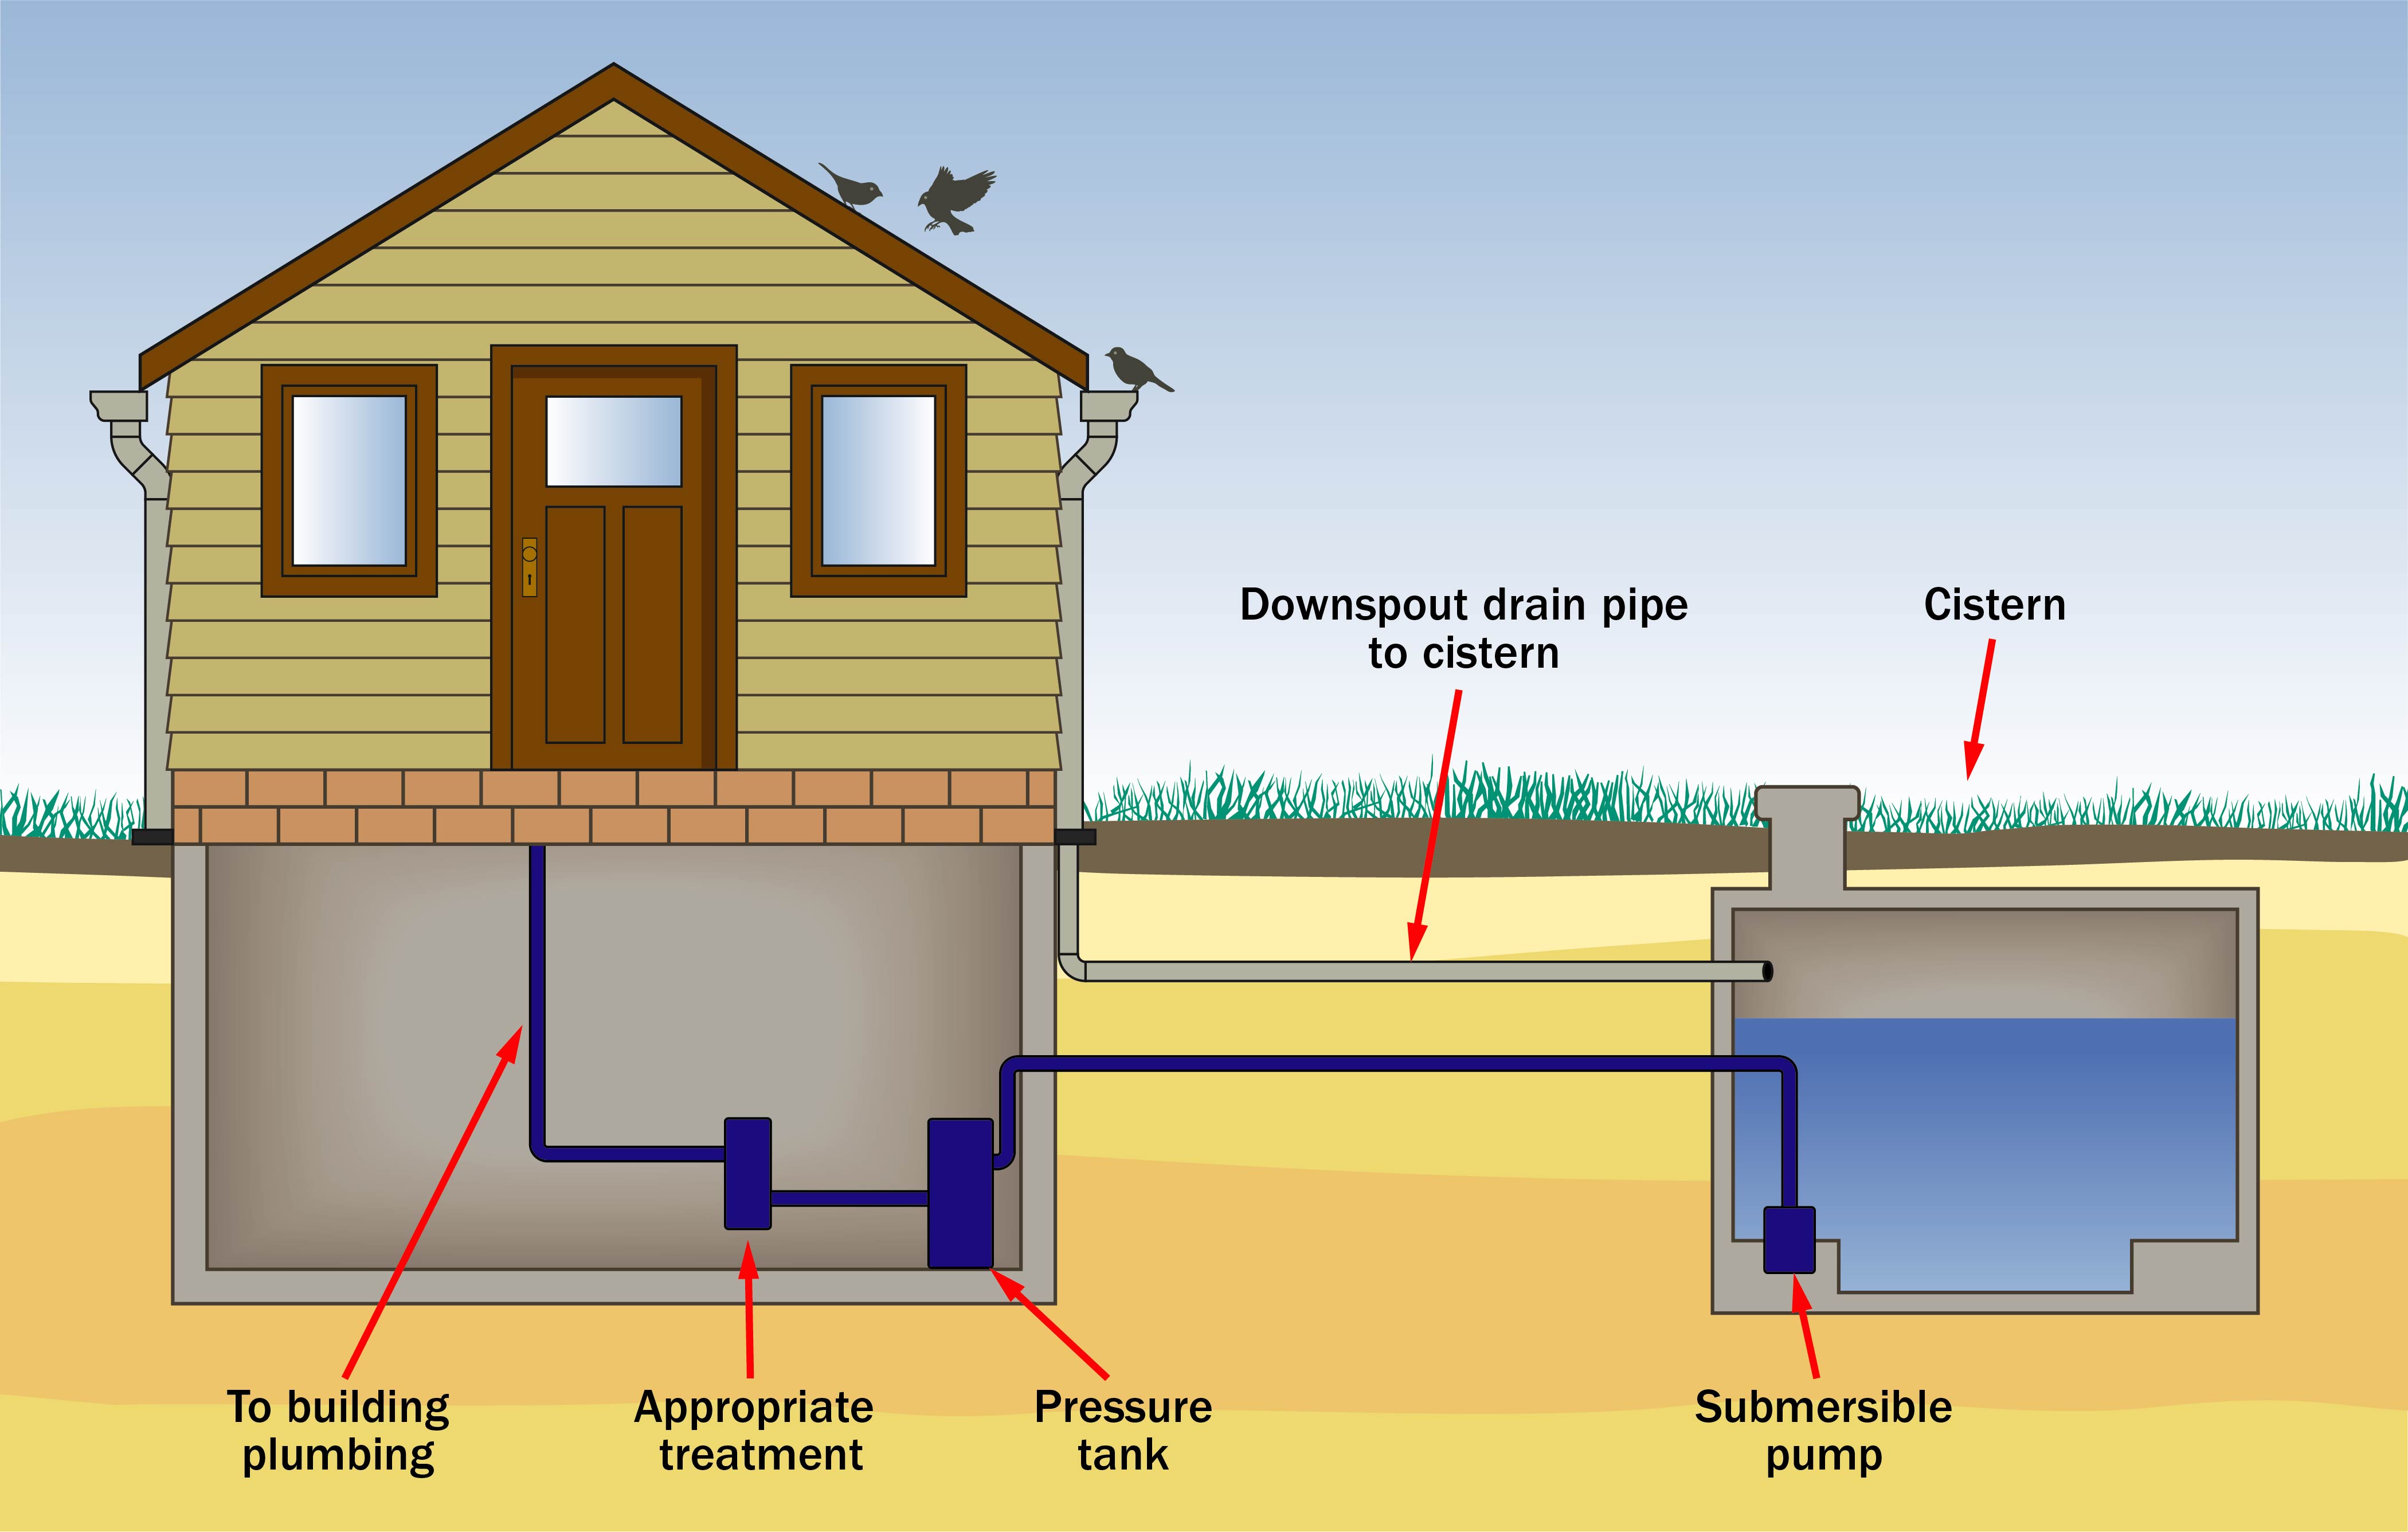 A cross-section of a cistern recharged by rooftop runoff with no water treatment. The cistern is recharged with rooftop runoff which may contain contaminants.